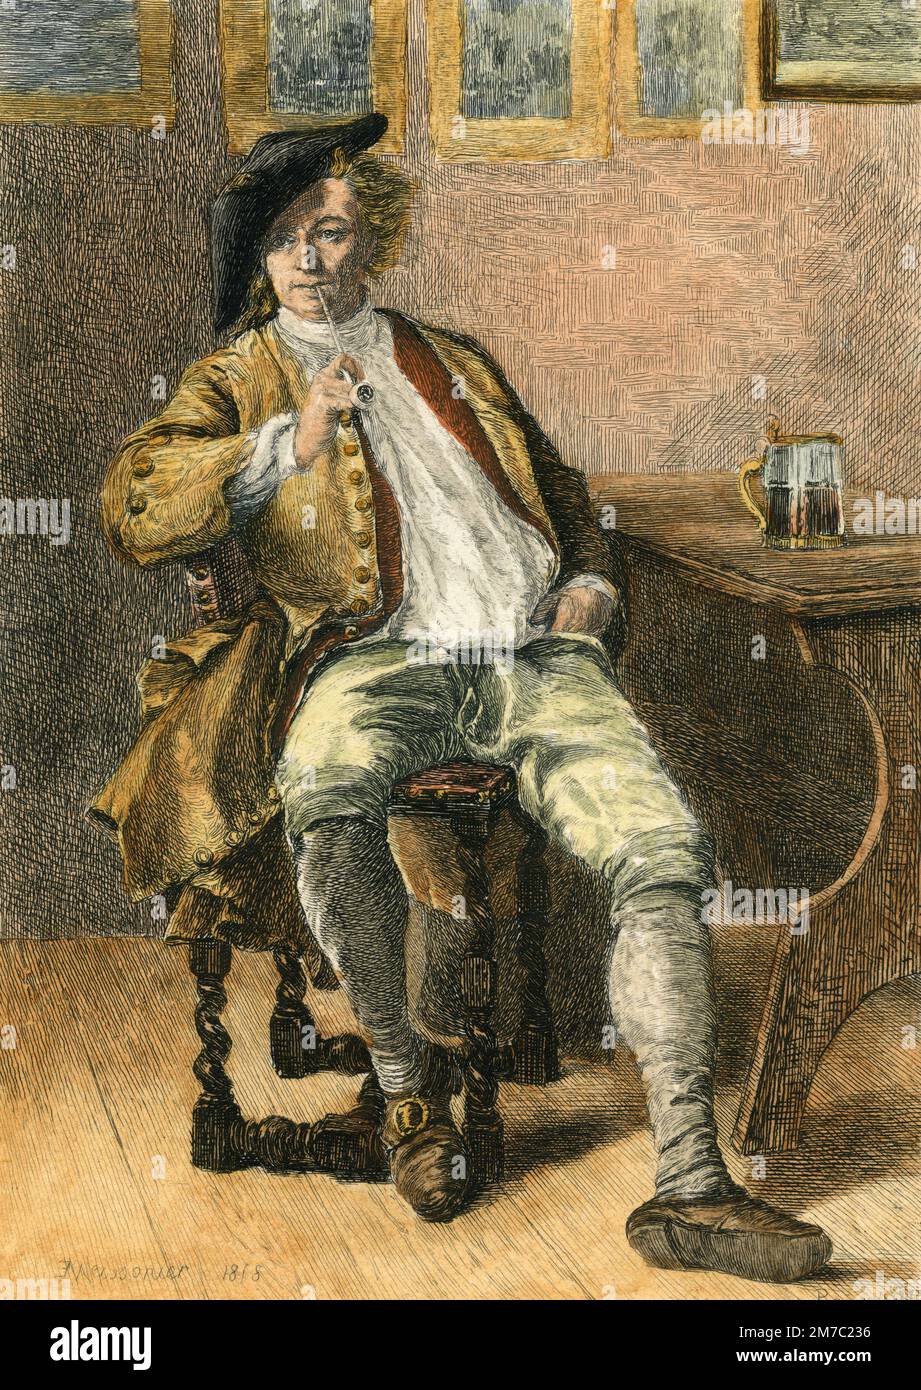 The Smoker, print engraved from a painting by J.L. Meissonier, UK, 1877 Stock Photo